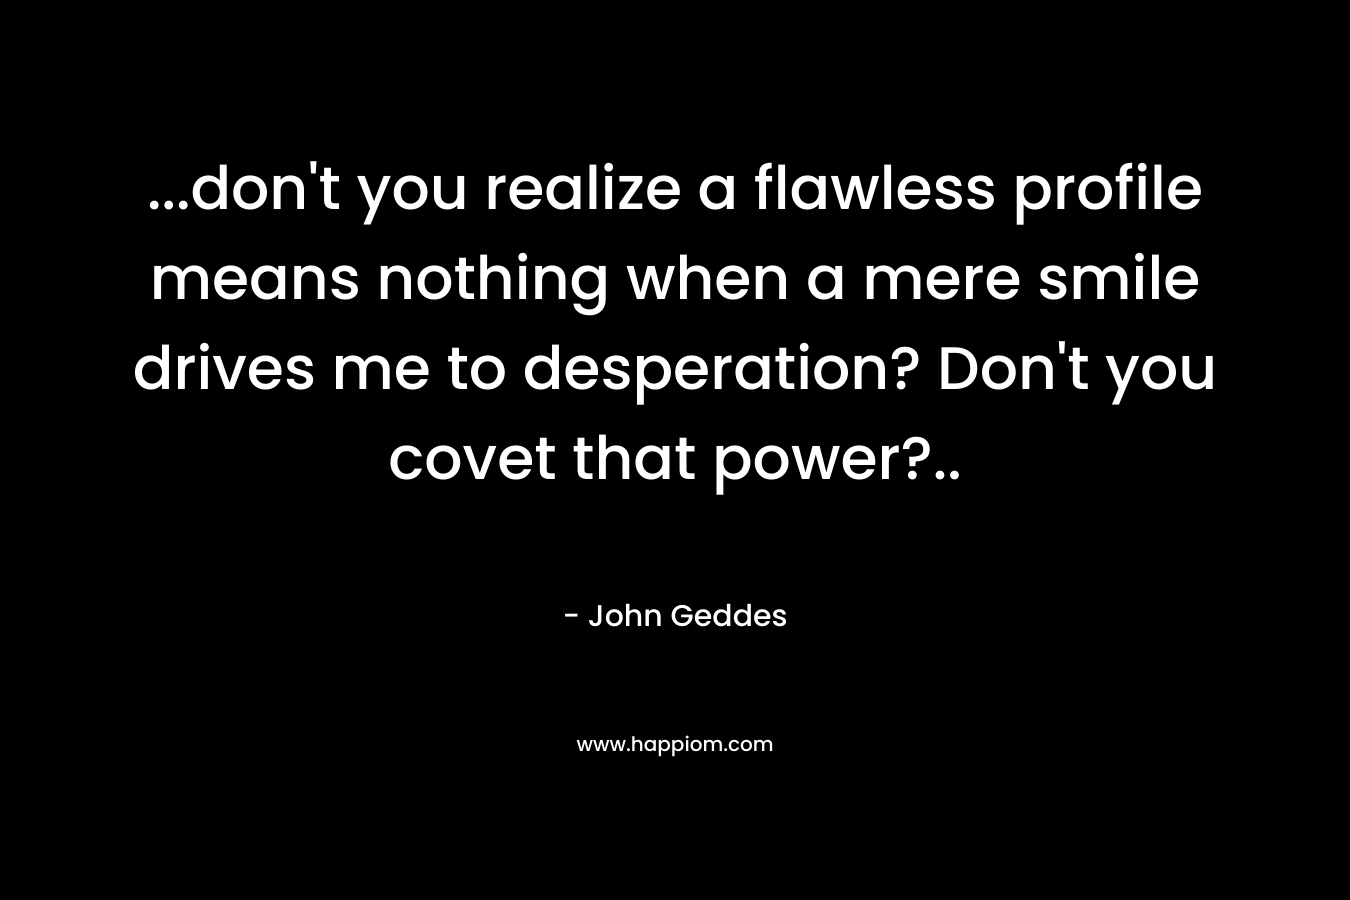 …don’t you realize a flawless profile means nothing when a mere smile drives me to desperation? Don’t you covet that power?.. – John Geddes